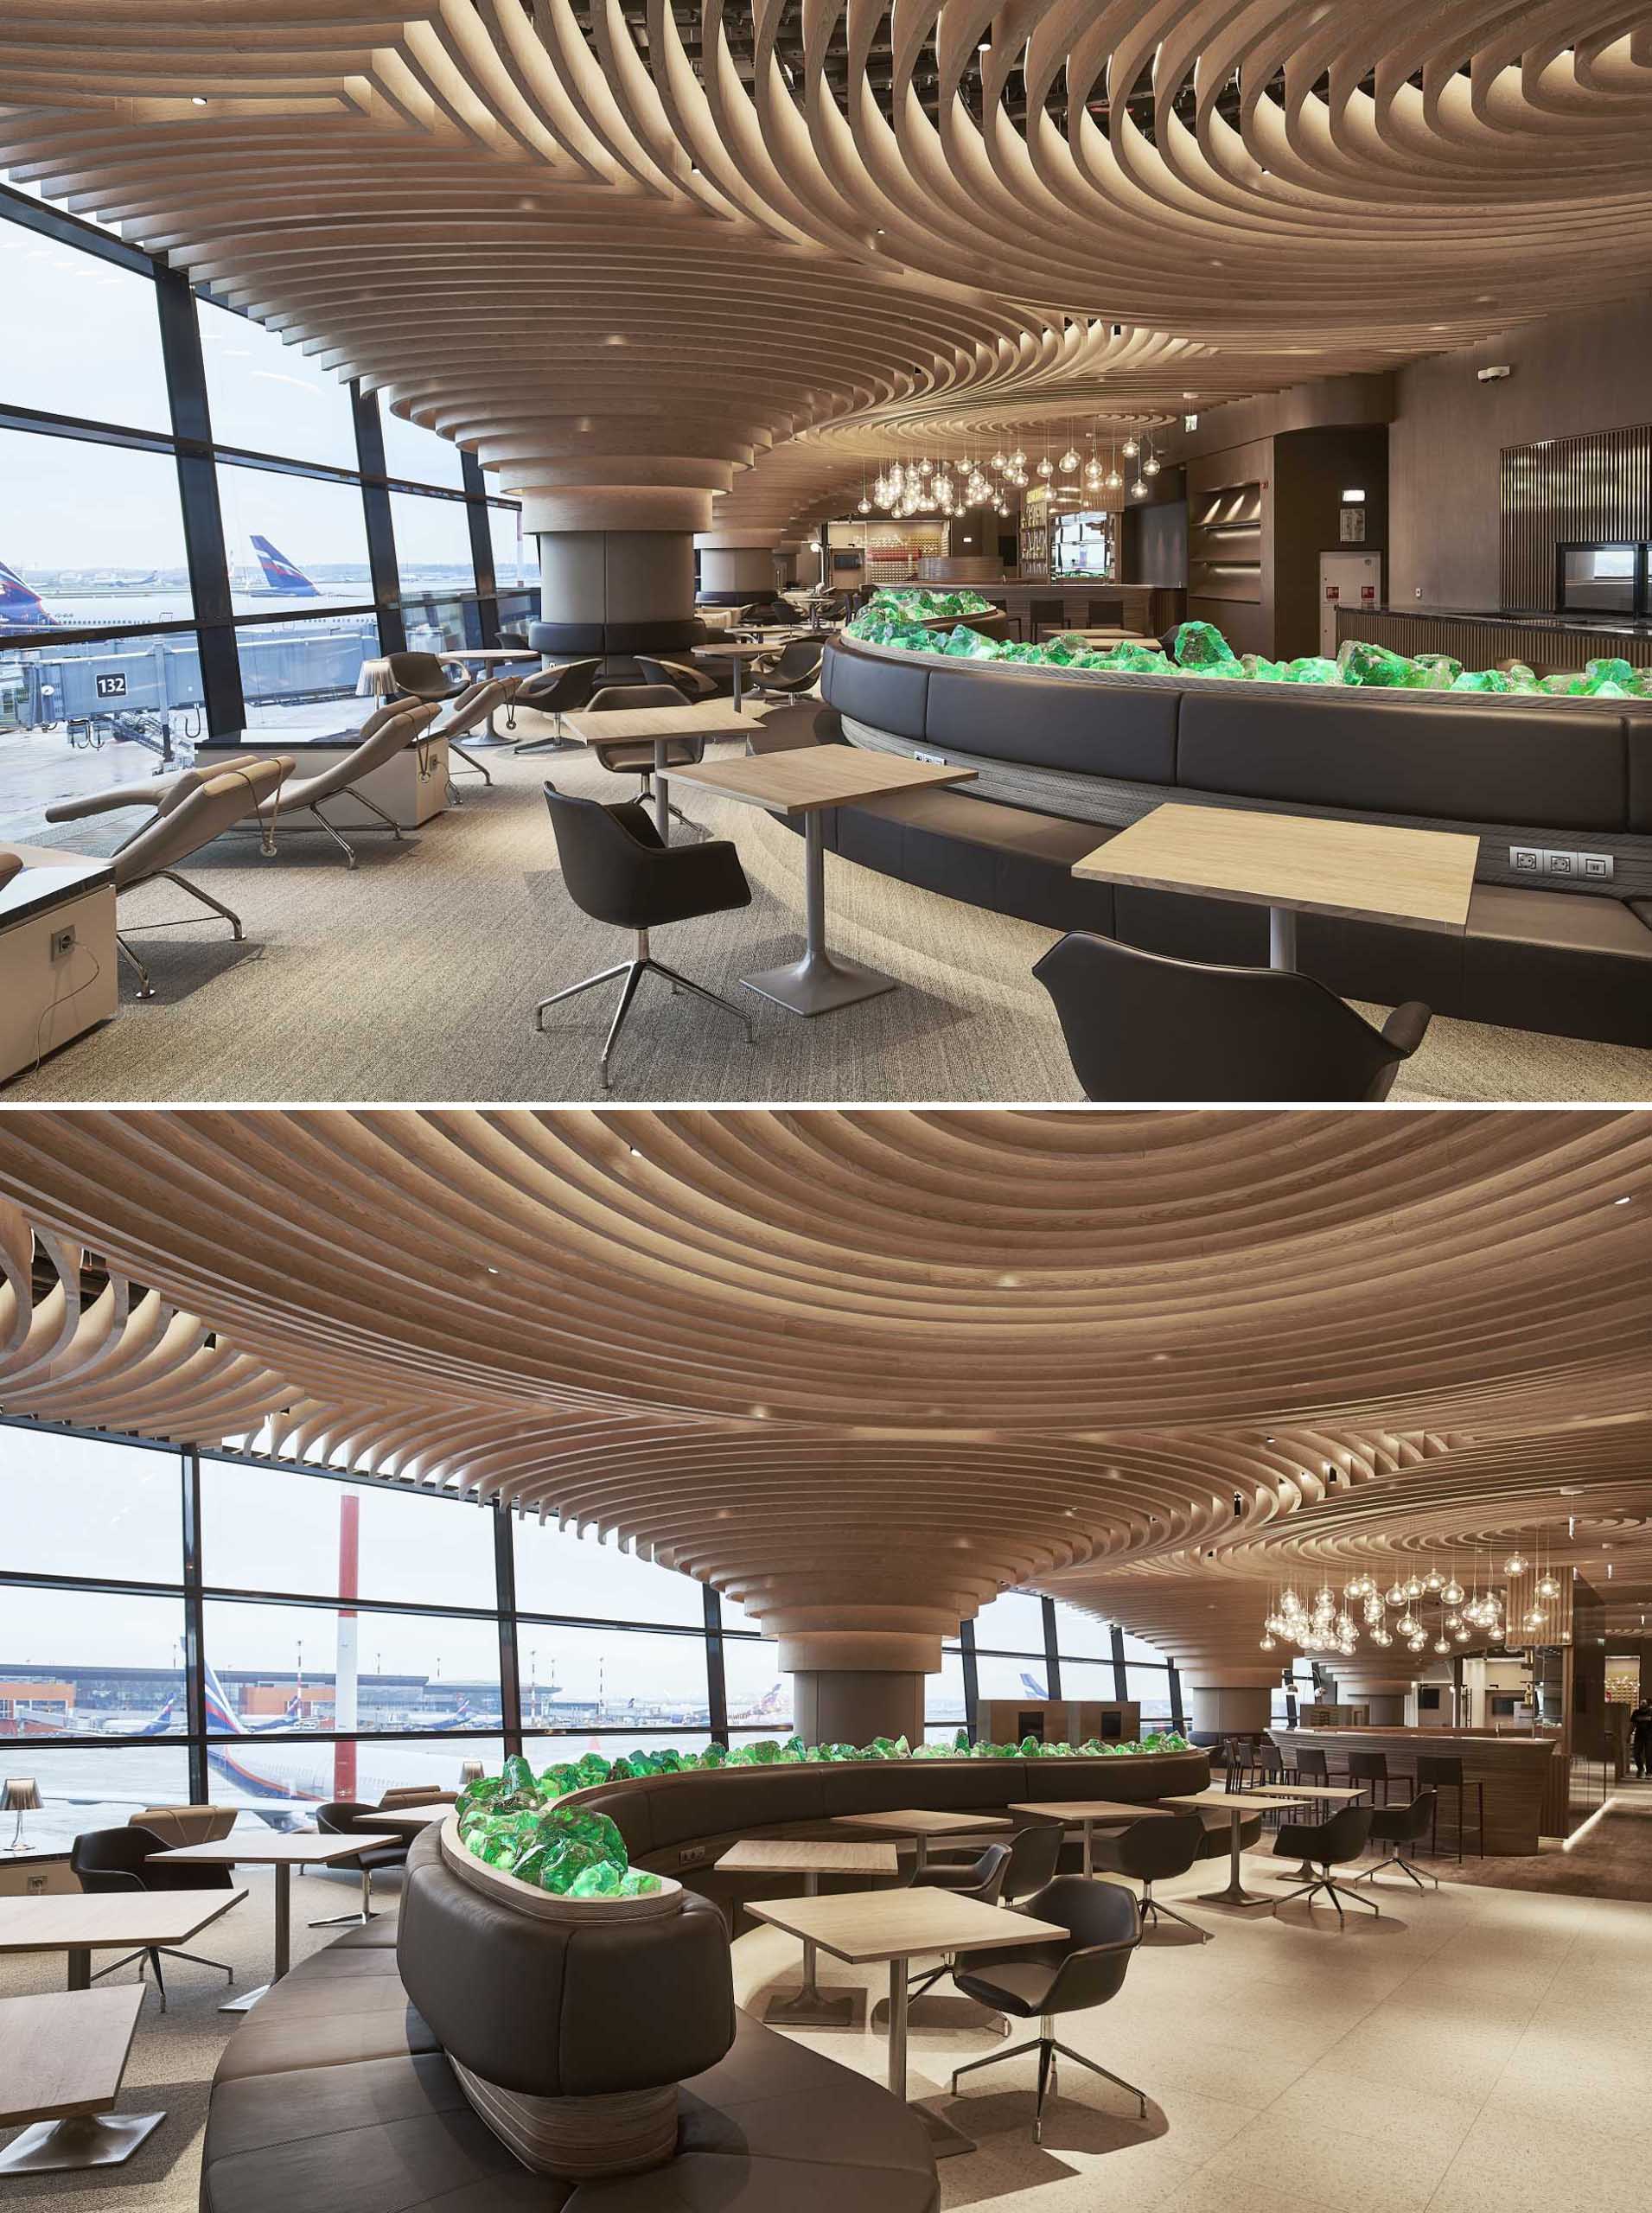 A sculptural wood ceiling covers the interior of this modern airport lounge.